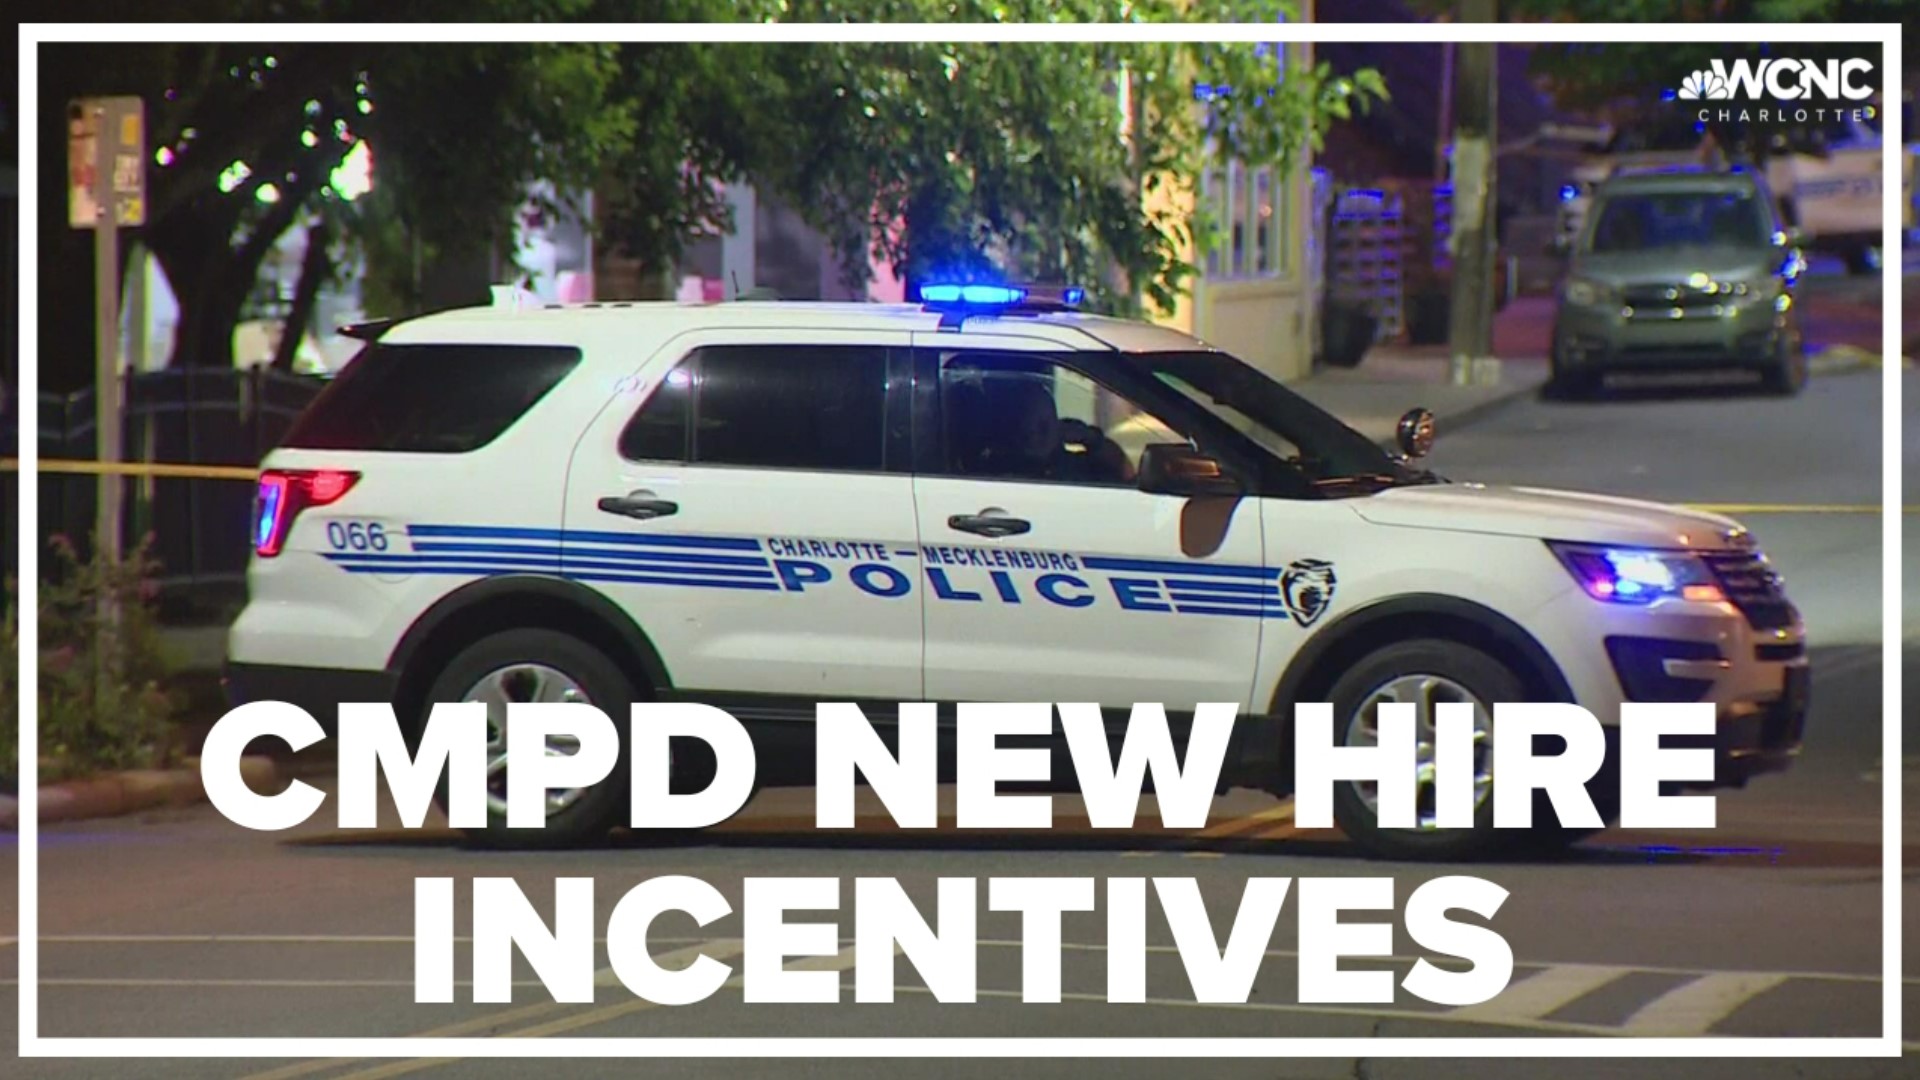 CMPD is 300 officers short and are creating new incentives to bring new recruits to the force.